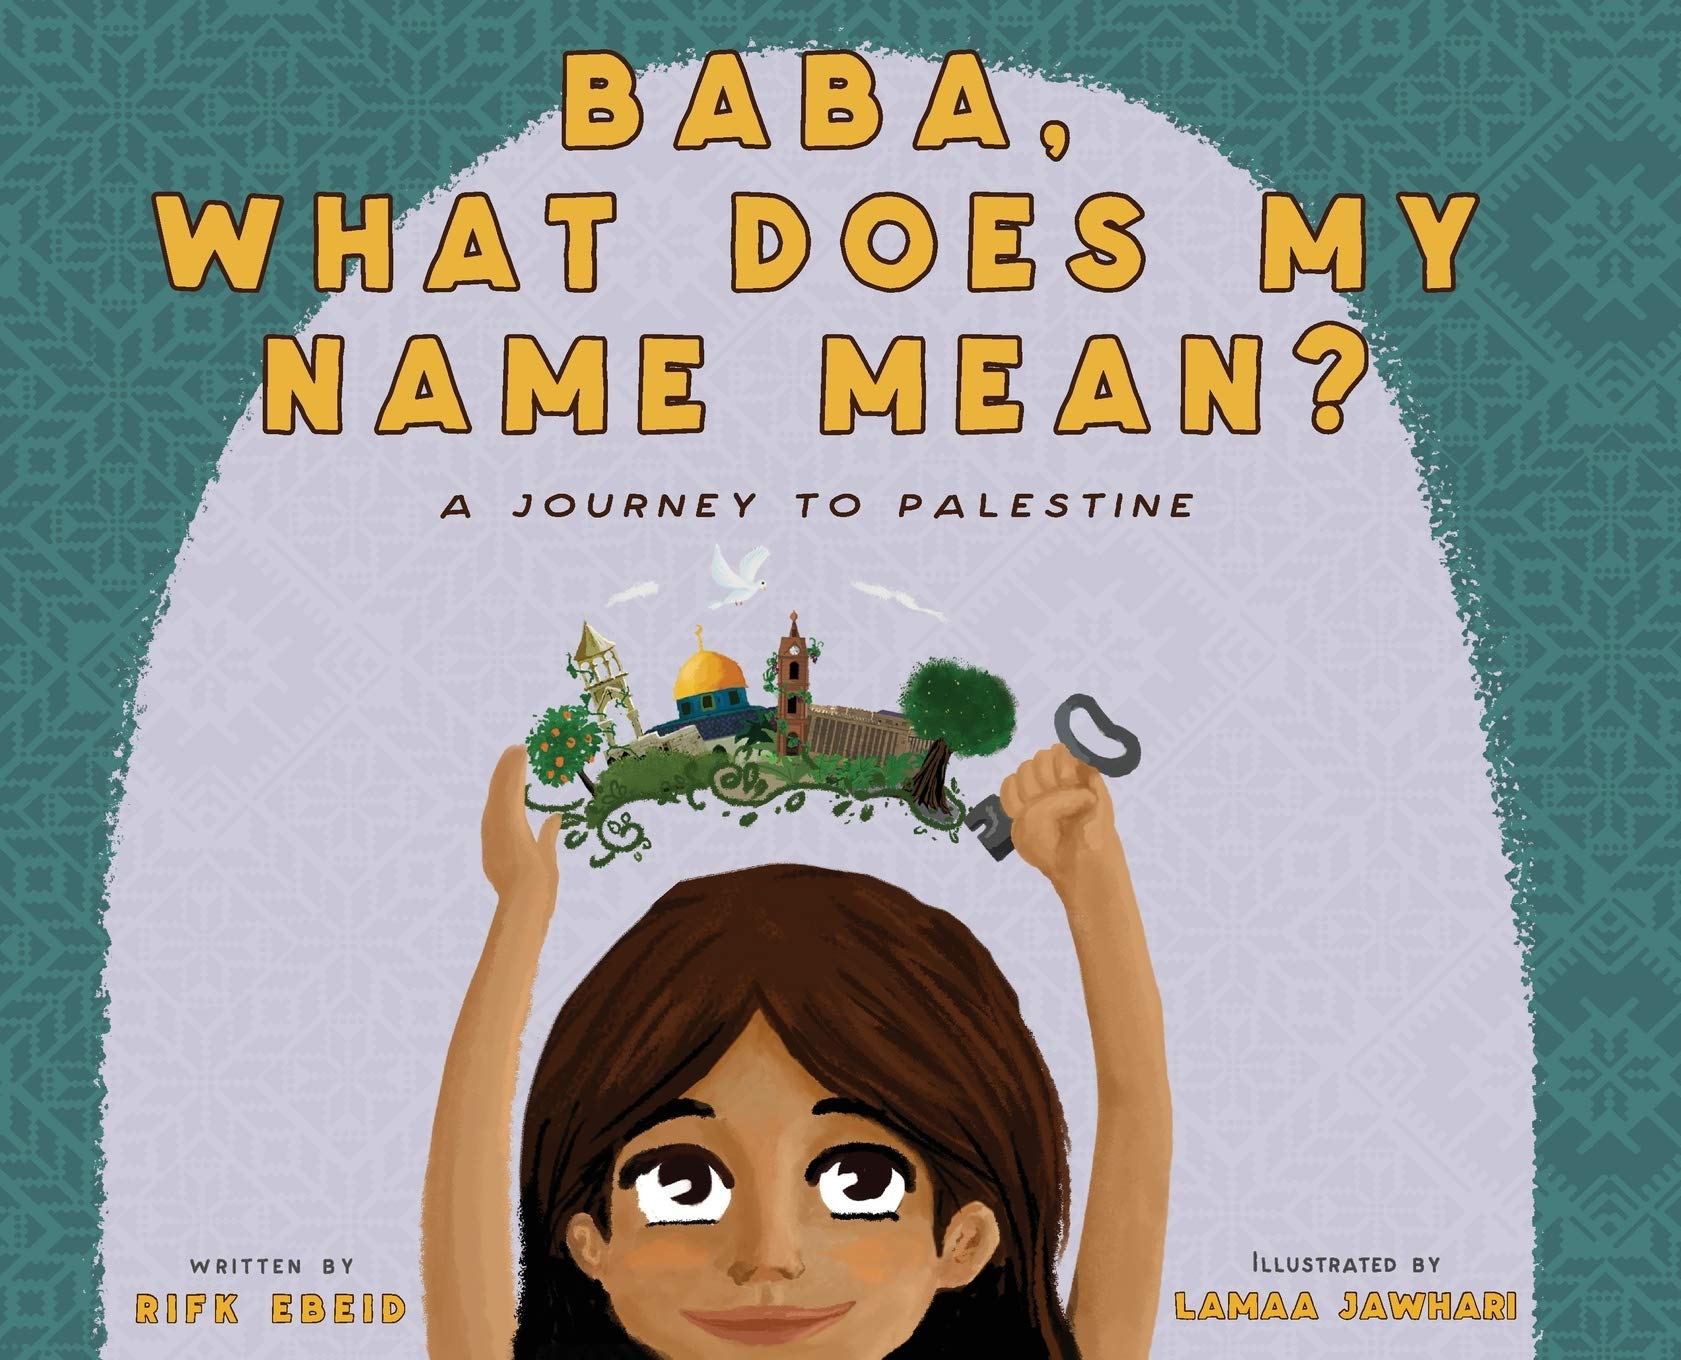 Baba what does my name mean book cover.